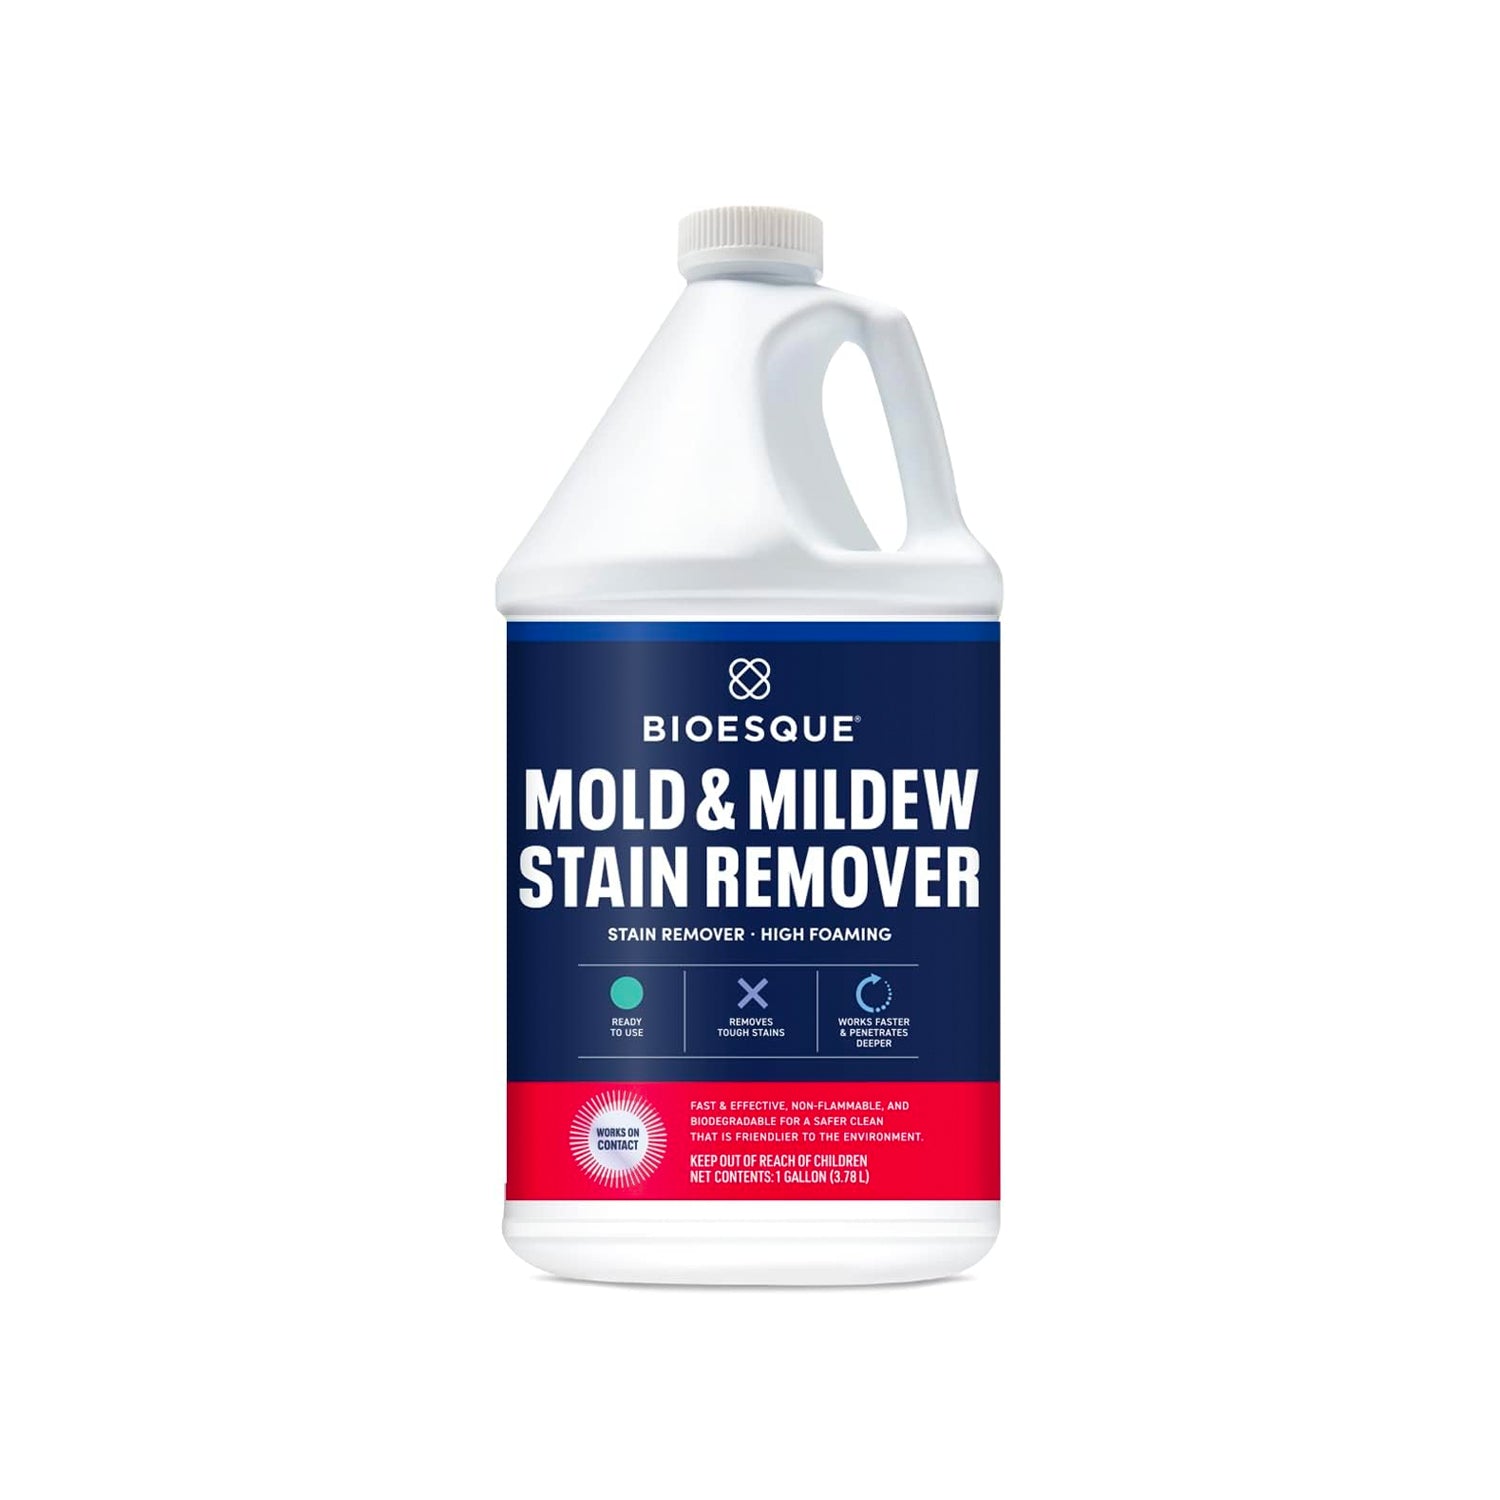 Bioesque Mold and Mildew Stain Remover